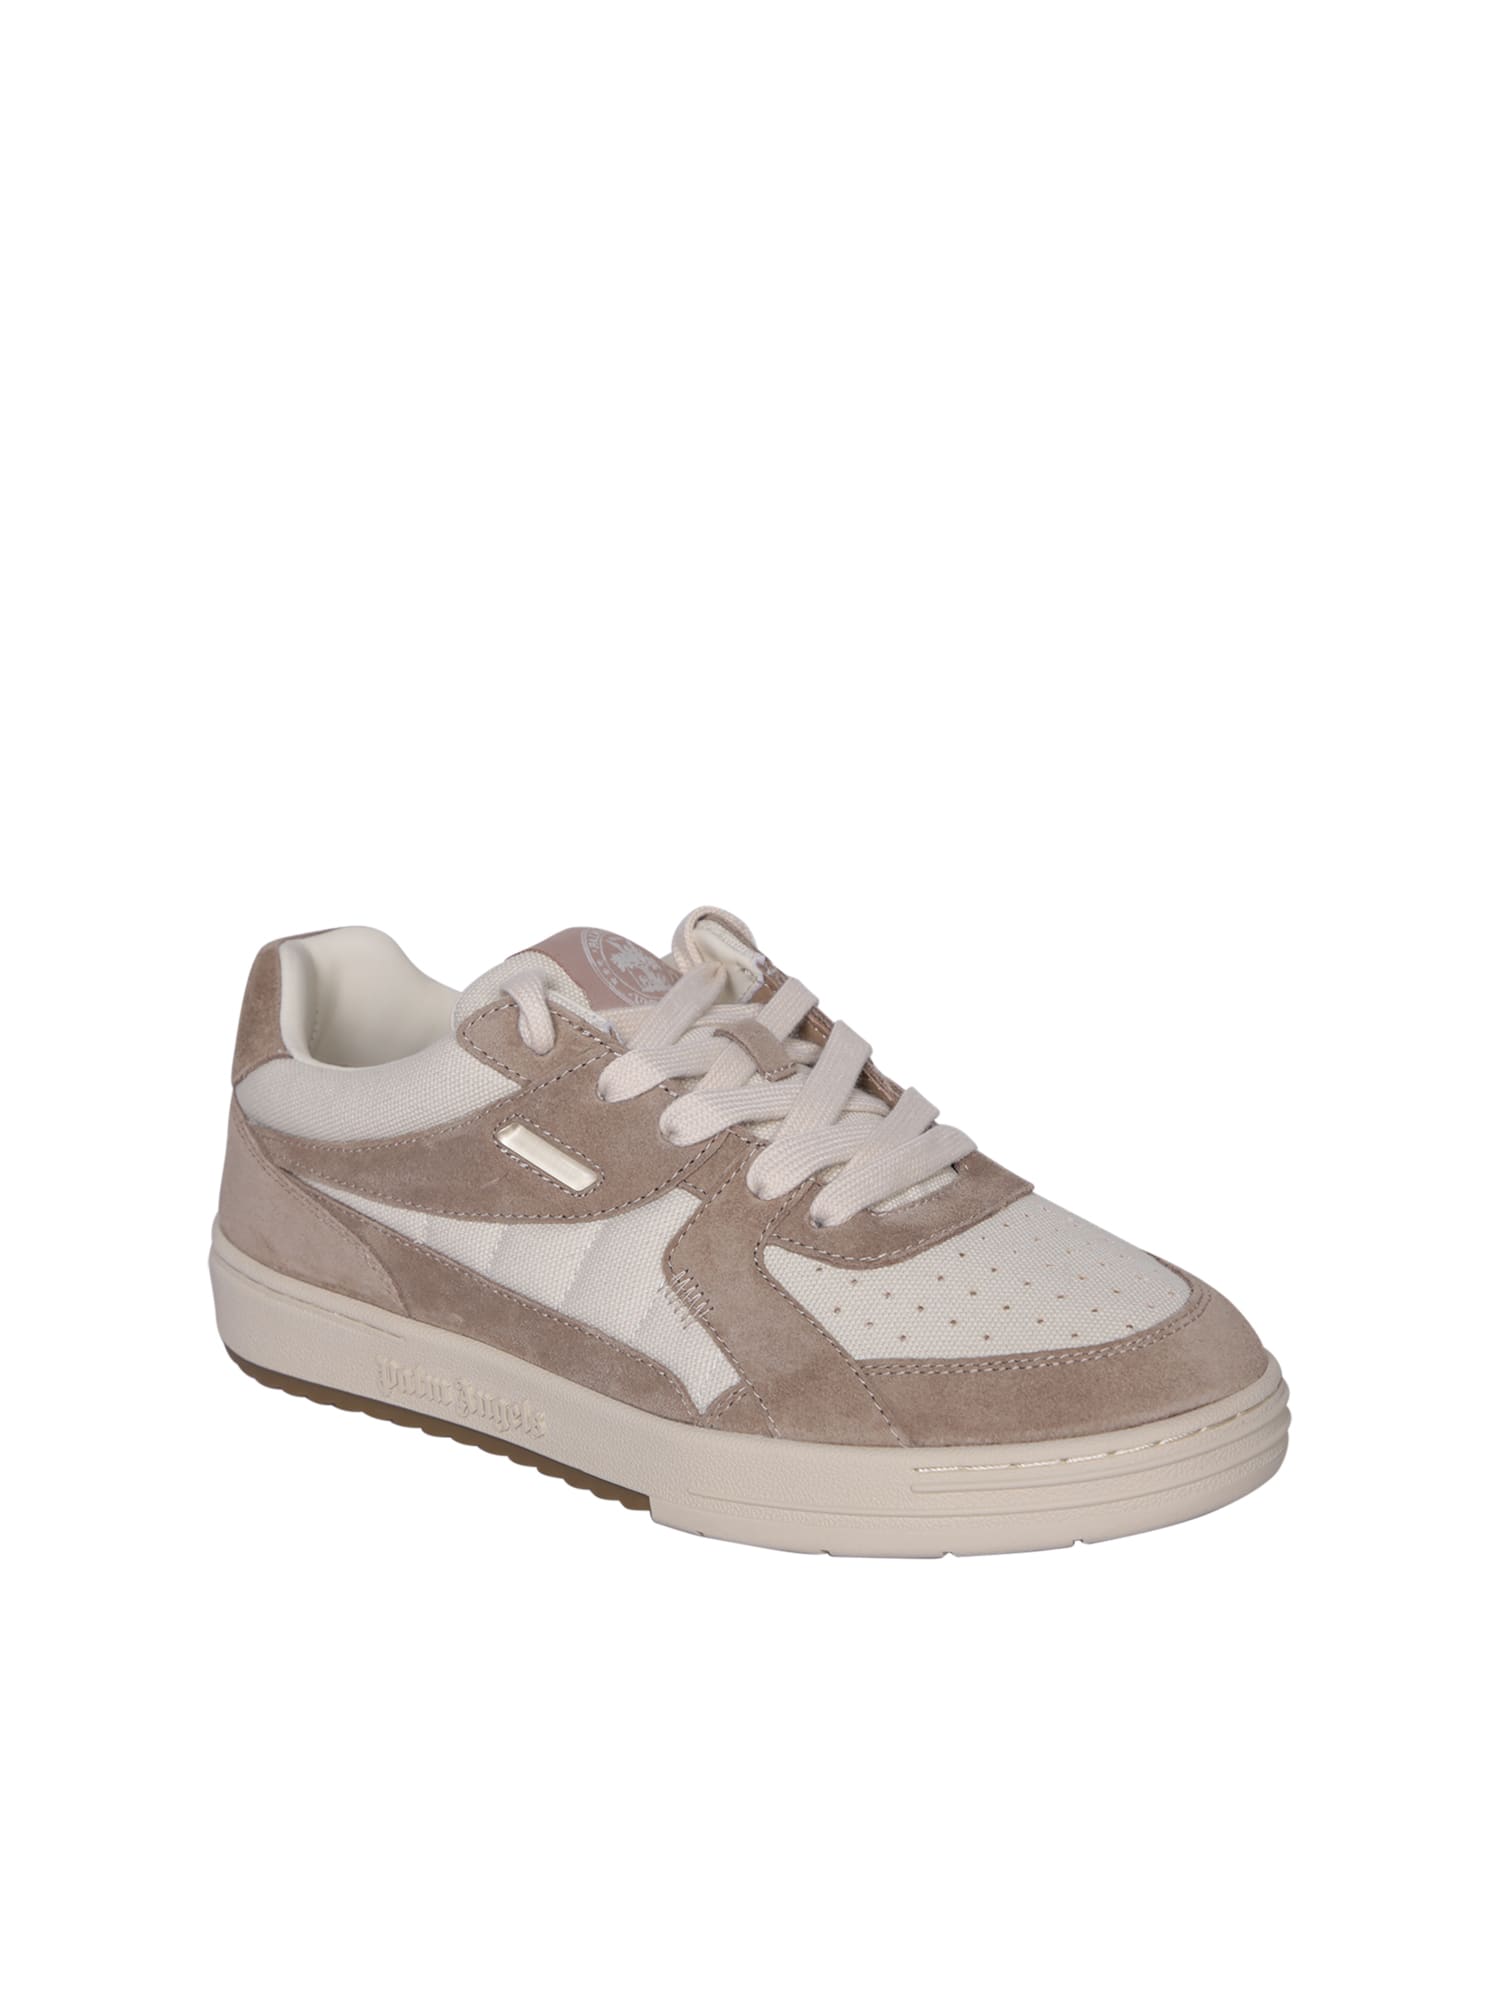 Shop Palm Angels University Suede White/ Camel Sneakers